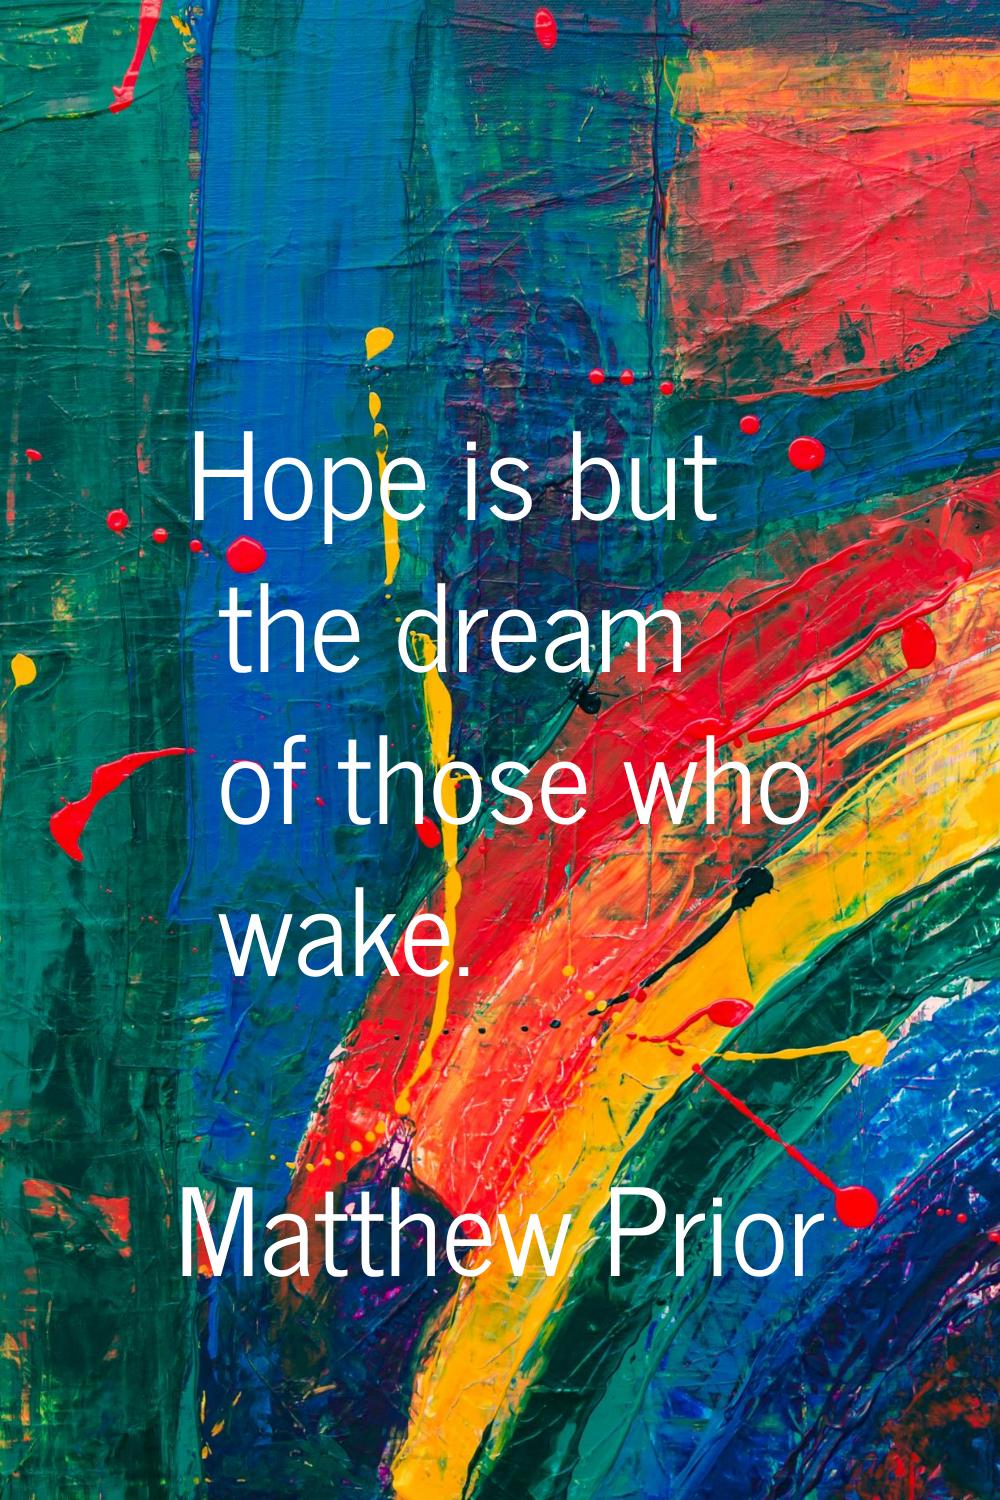 Hope is but the dream of those who wake.